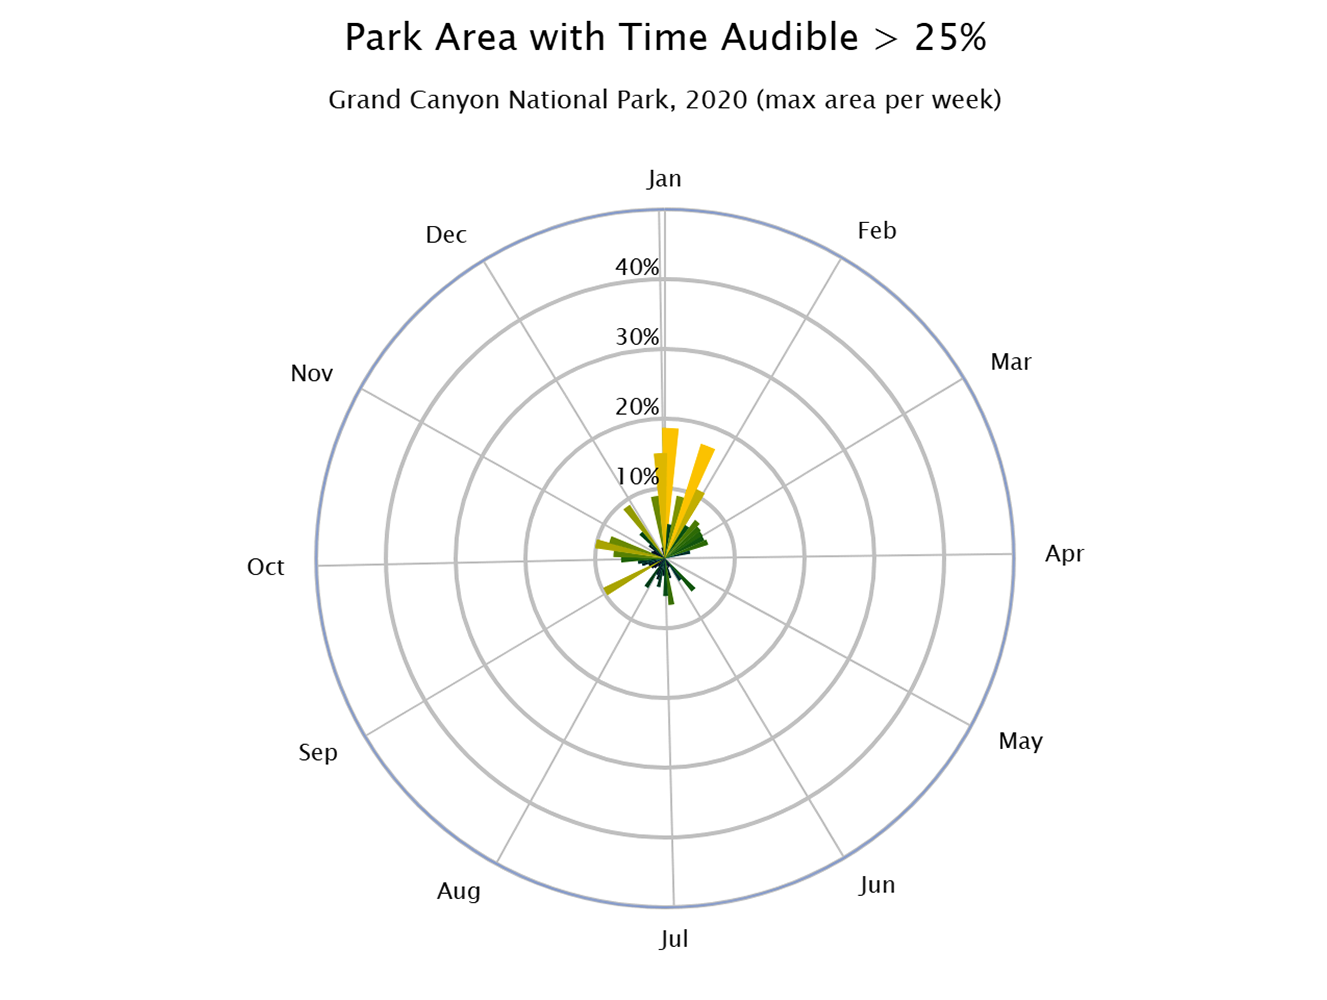 A polar plot of the percentage of modeled points in the park with a time audible of greater than 25%, versus week of the year, 2020